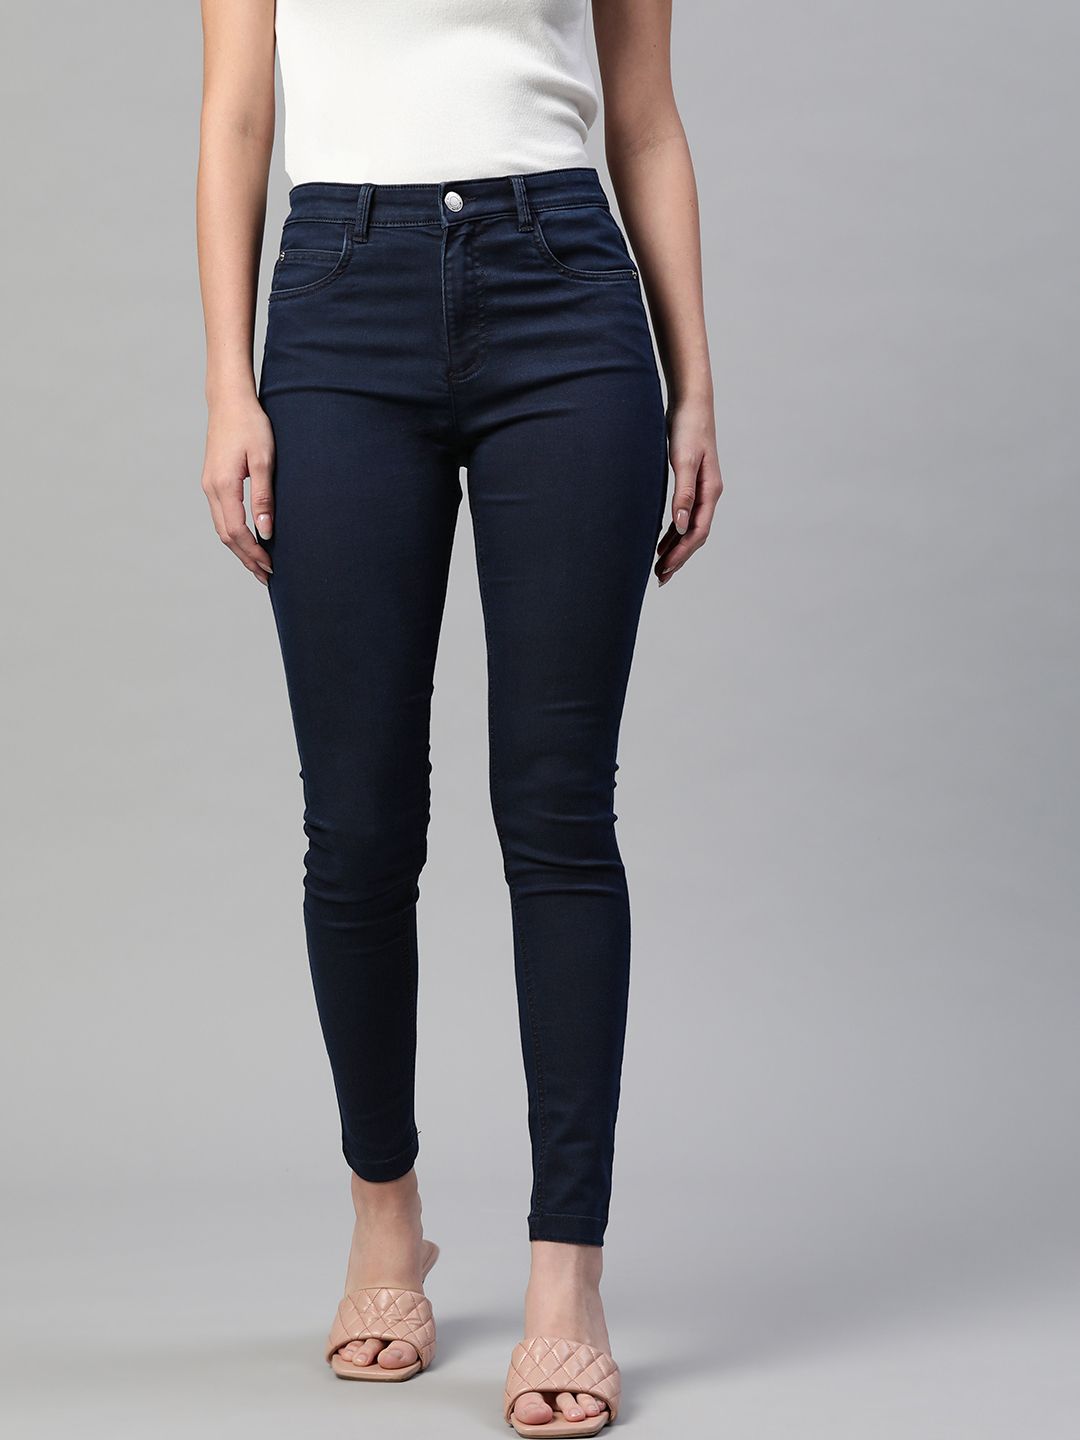 Marks & Spencer Women Navy Blue Slim Fit Stretchable Jeans Price in India